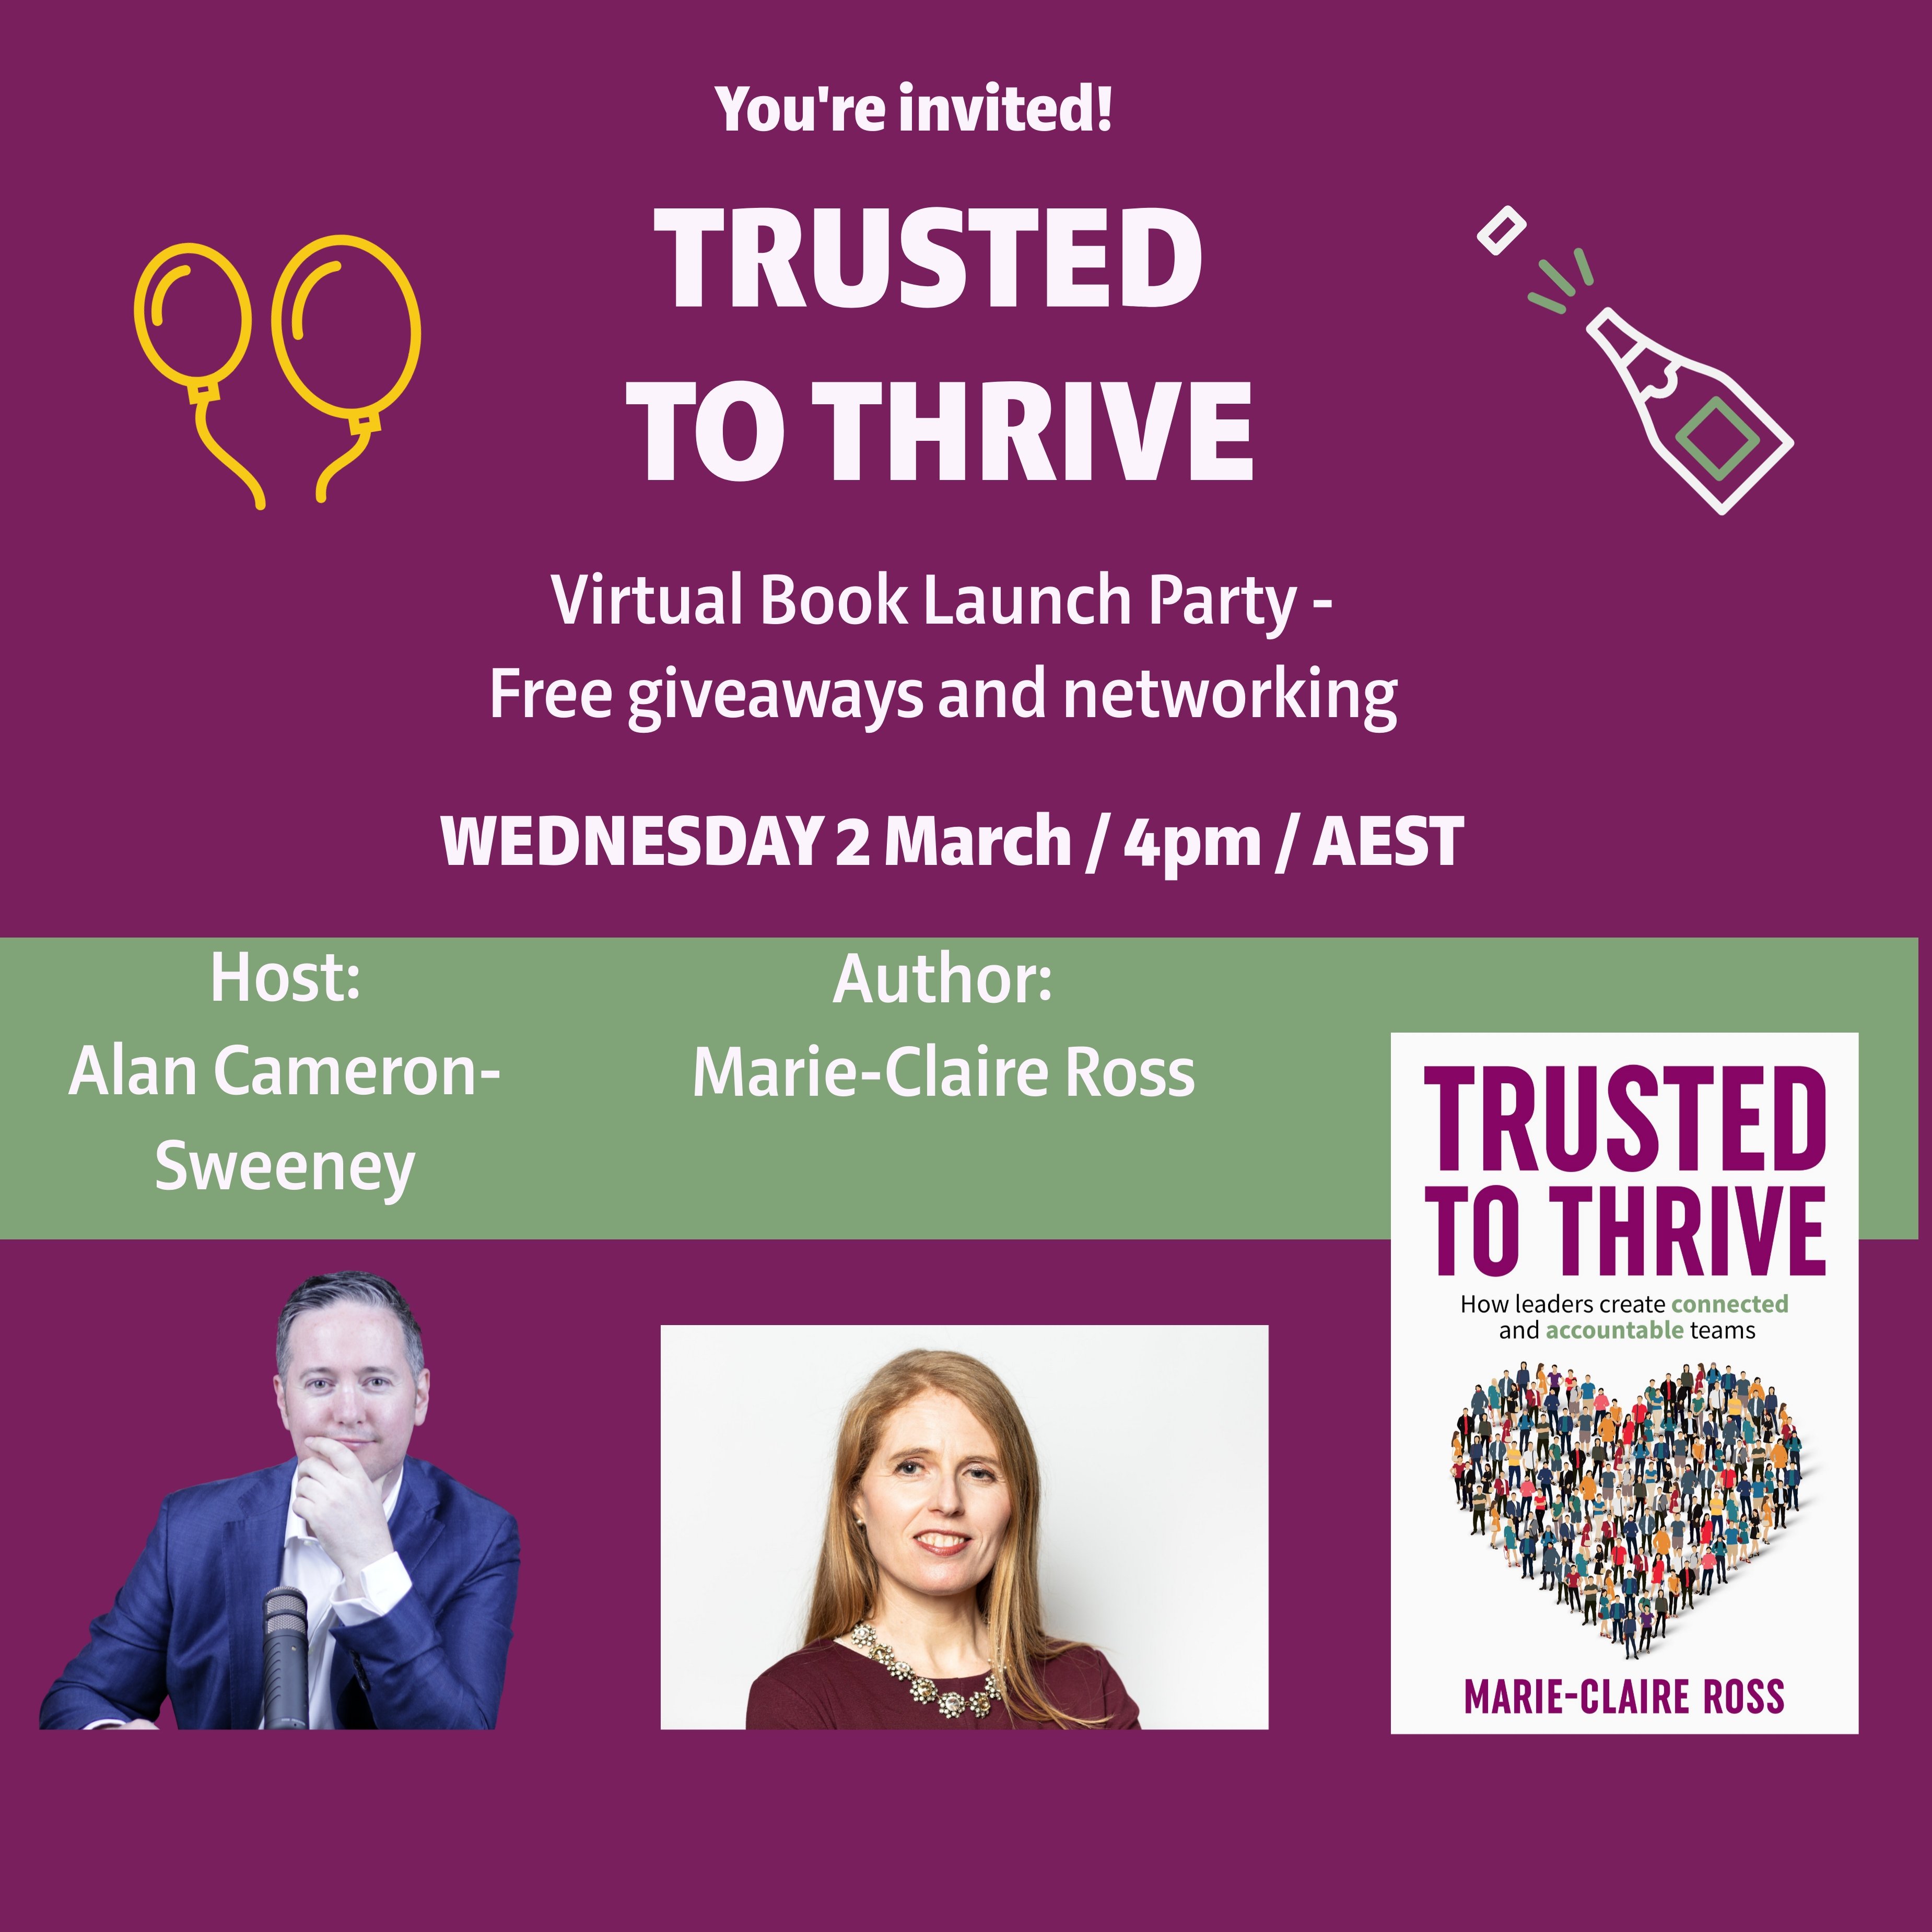 TRUSTED TO THRIVE BOOK LAUNCH